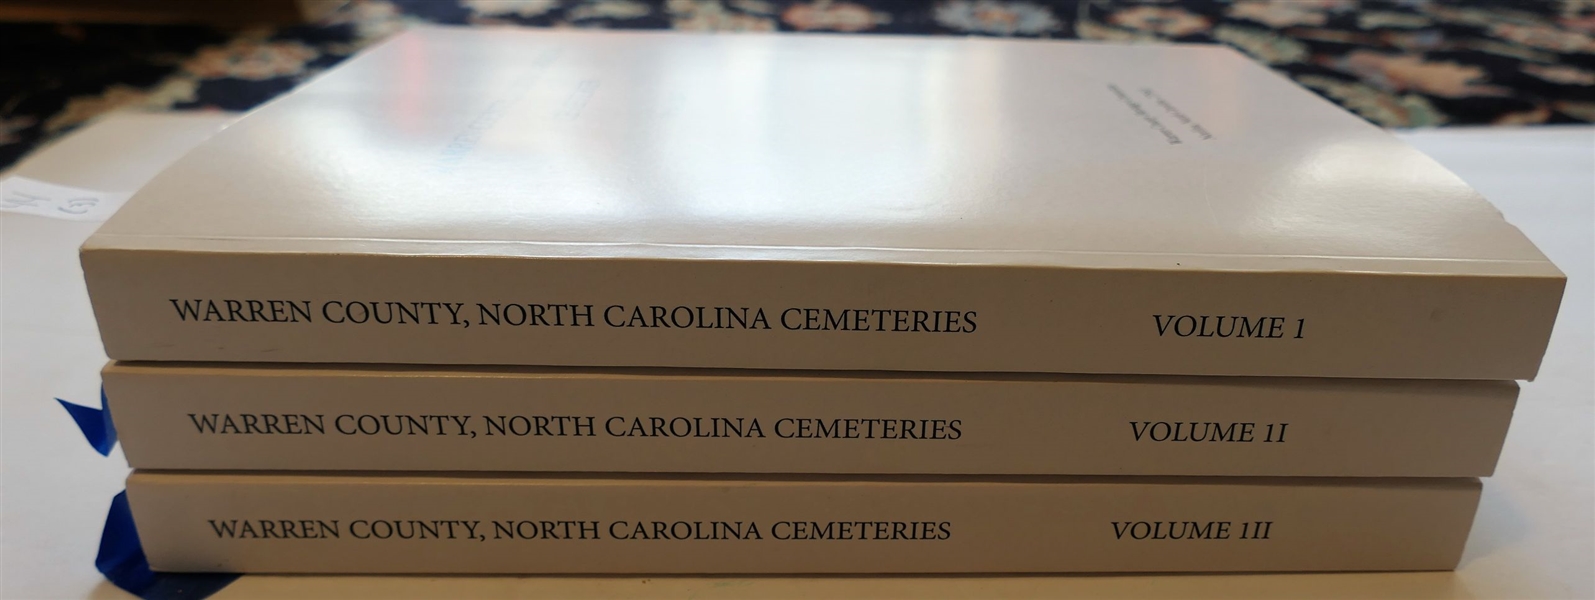 Warren County, North Carolina Cemeteries Volumes I-III - Published by the Warren County Heritage Committee - Norlina, North Carolina 2011 - Paperbound